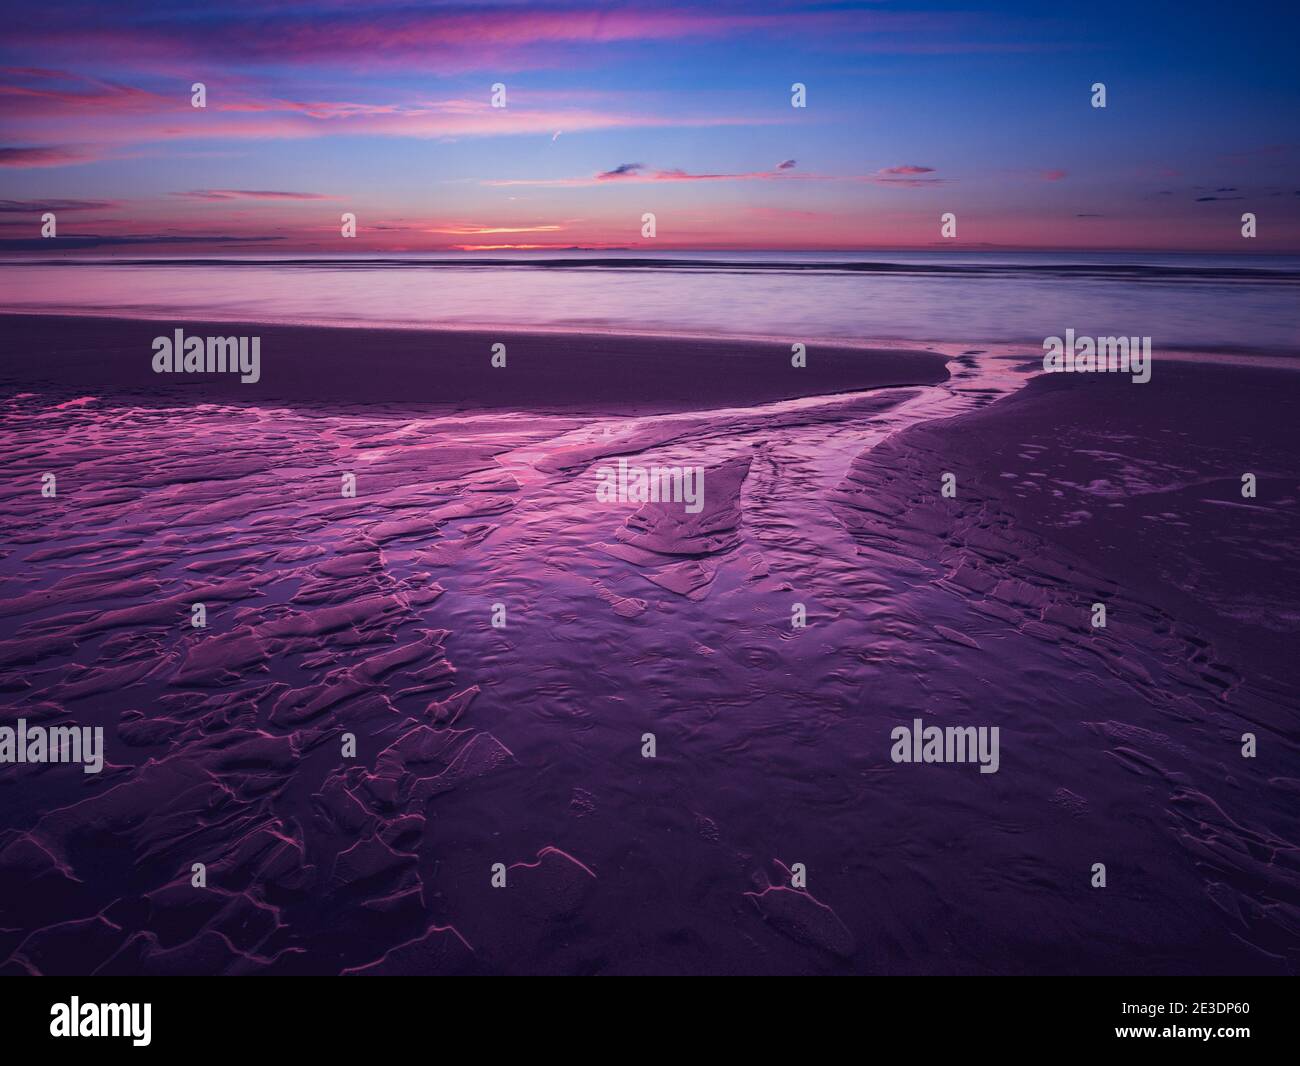 Colorful purple sunset at the beach with sand ripples in the foreground at low tide Stock Photo